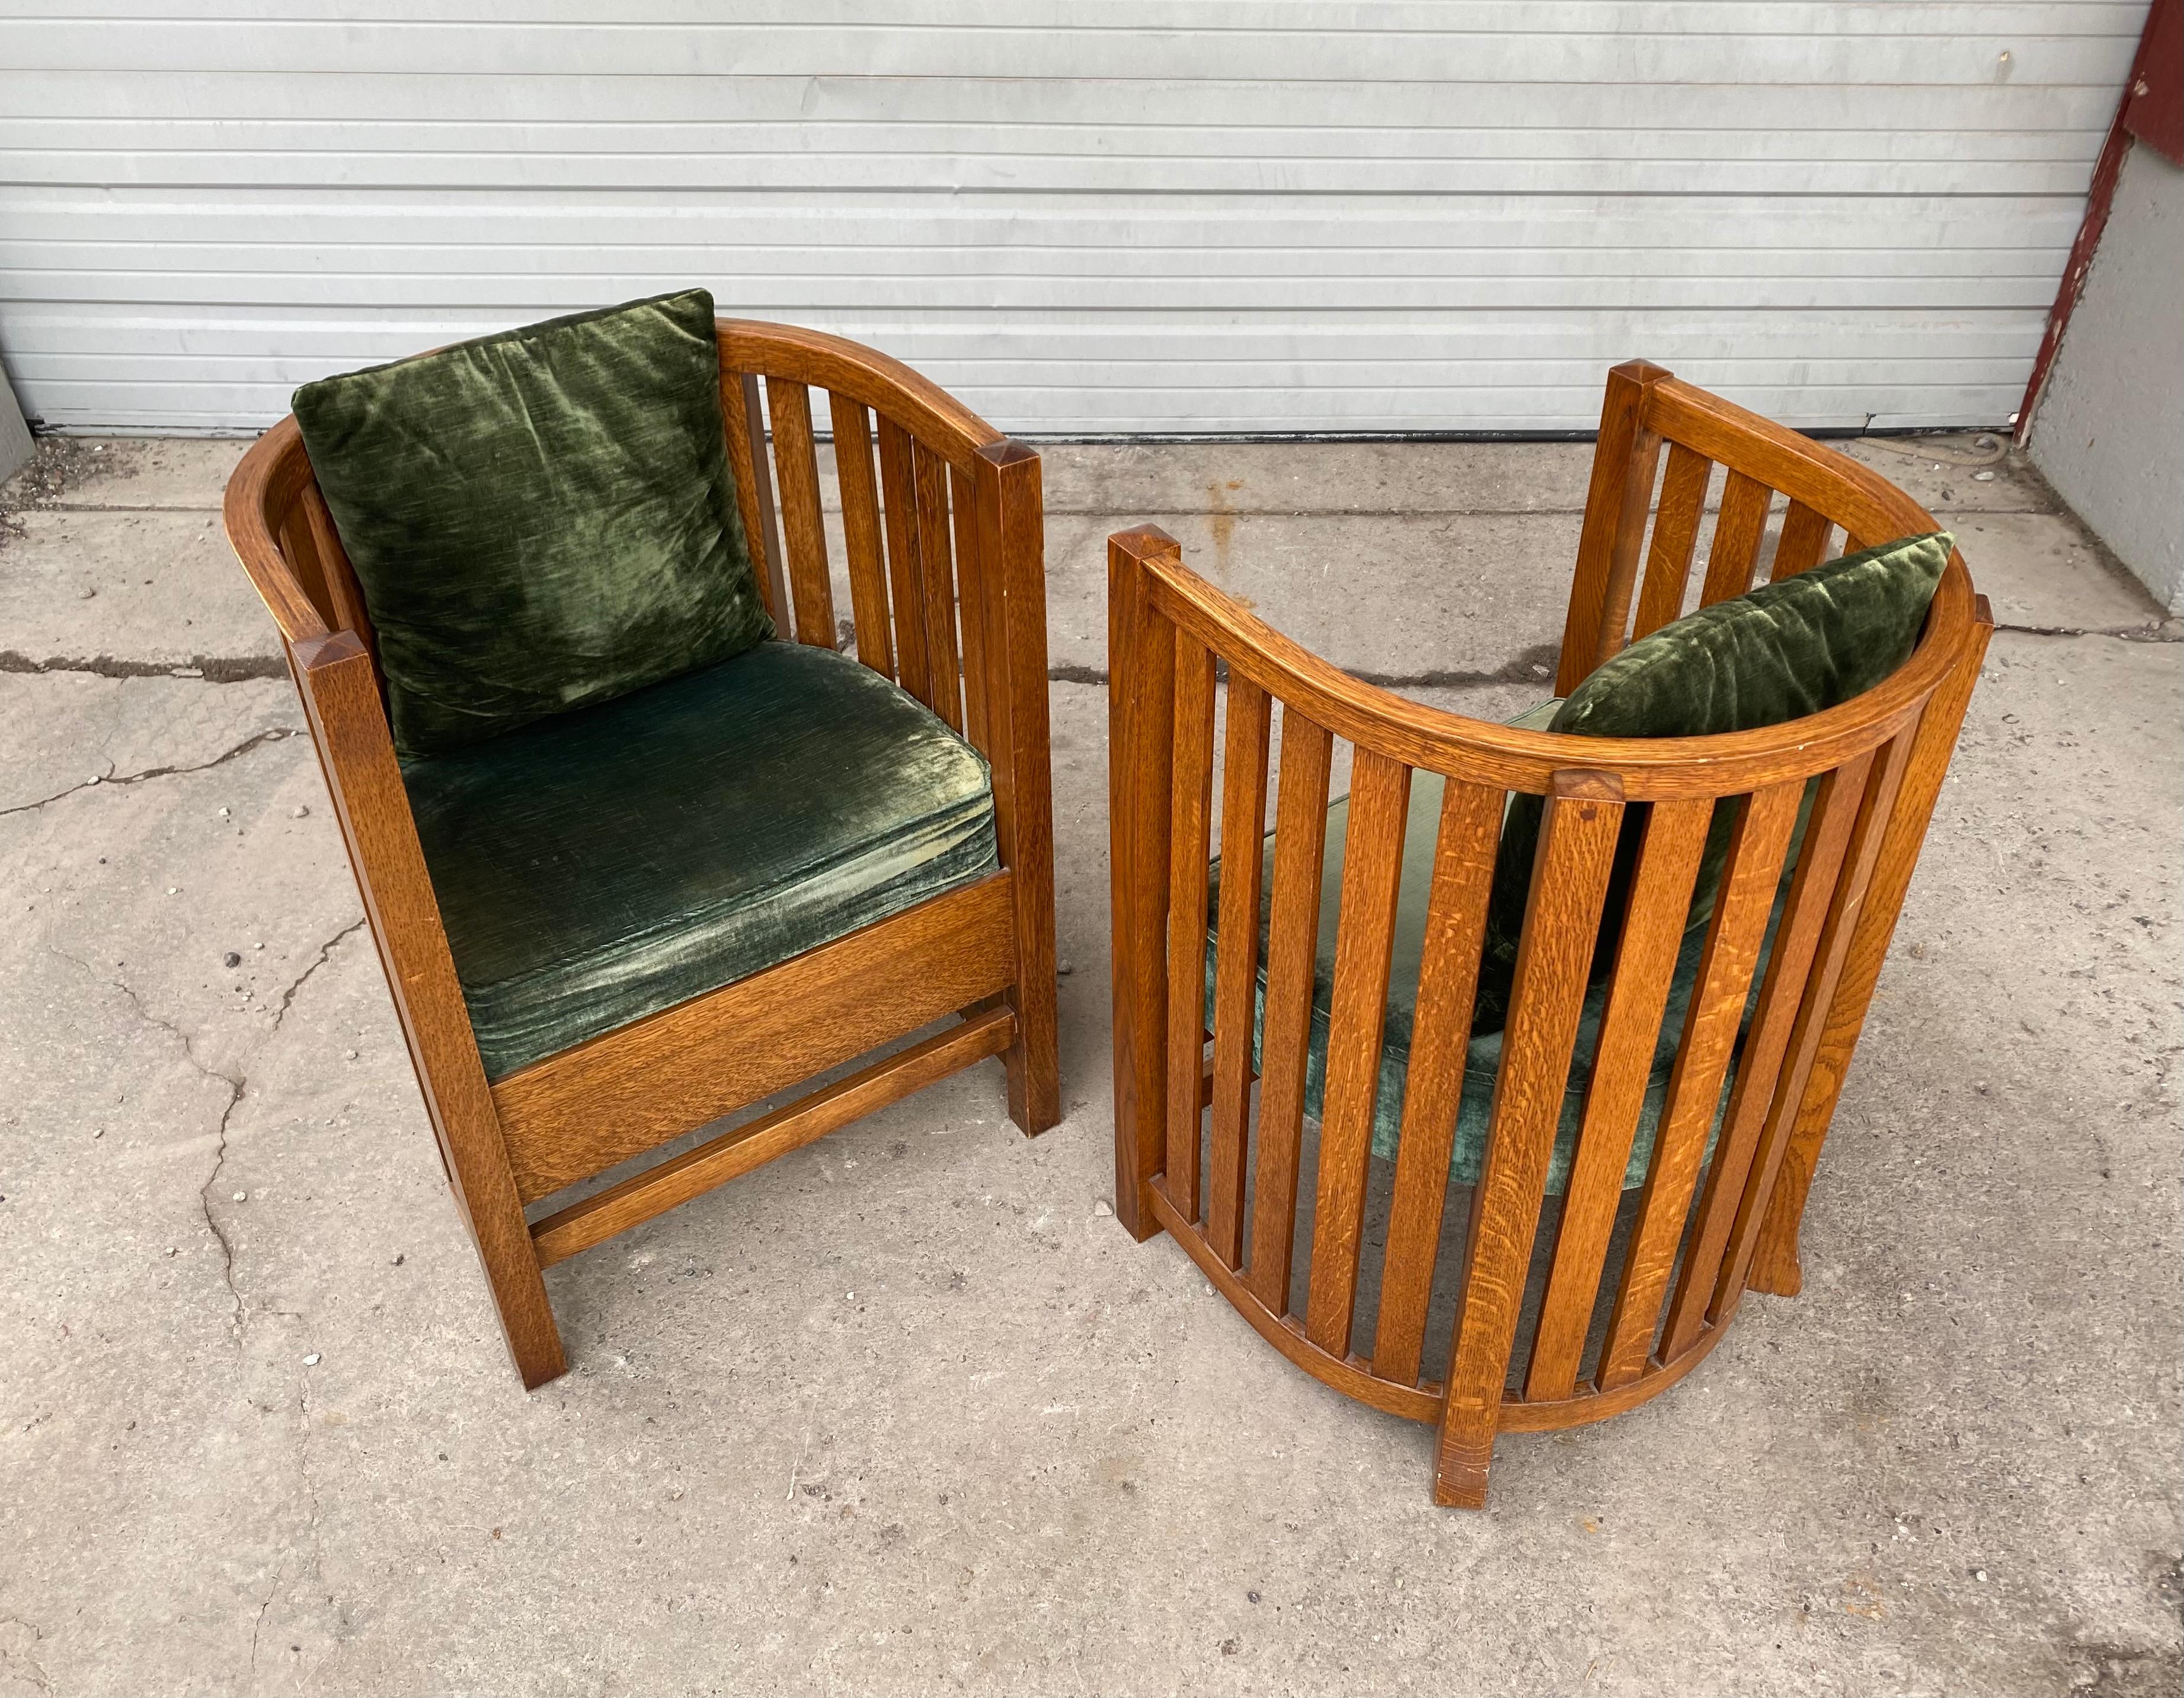 Arts and Crafts Classic Pair of Barrel Chairs, after Frank Lloyd Wright, attrib. Plail Brothers